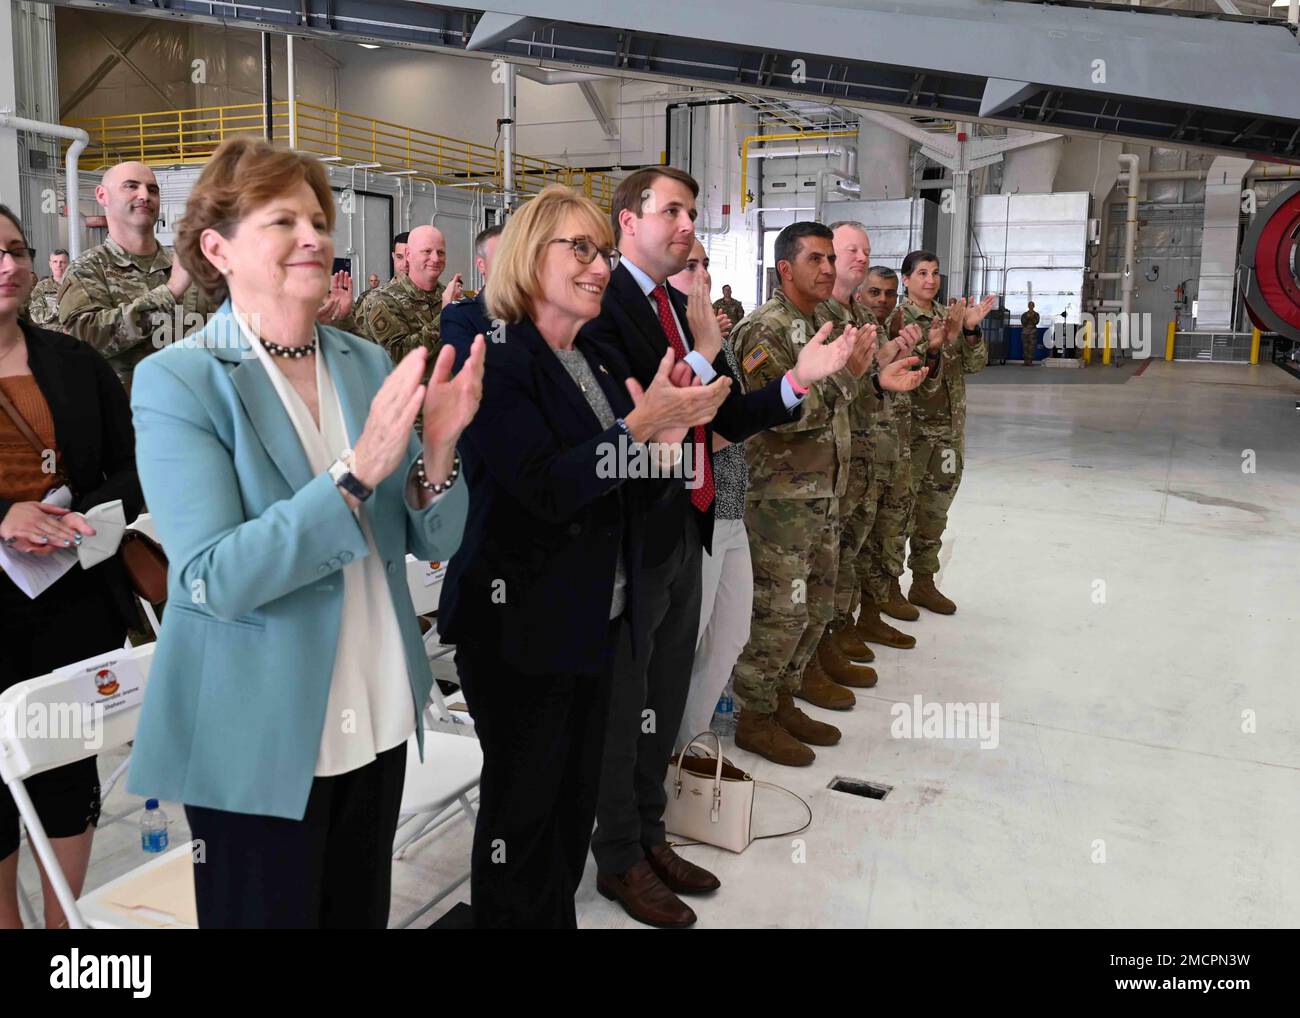 From left, a congressional delegation including Sen. Jeanne Shaheen, Sen. Maggie Hassan, and Rep. Chris Pappas applaud alongside senior New Hampshire National Guard leadership during the 64th Air Refueling Squadron assumption of command ceremony July 8, 2022, at Pease Air National Guard Base in Newington, New Hampshire. The 64th was originally assigned to Pease in 2009 in support of the KC-135 Stratotanker, which was divested in 2019. The unit returned to help support the Wing's new complement of a dozen KC-46A Pegasus refuelers. The 64th is expected to grow to 160 Airmen by December 2023. Stock Photo